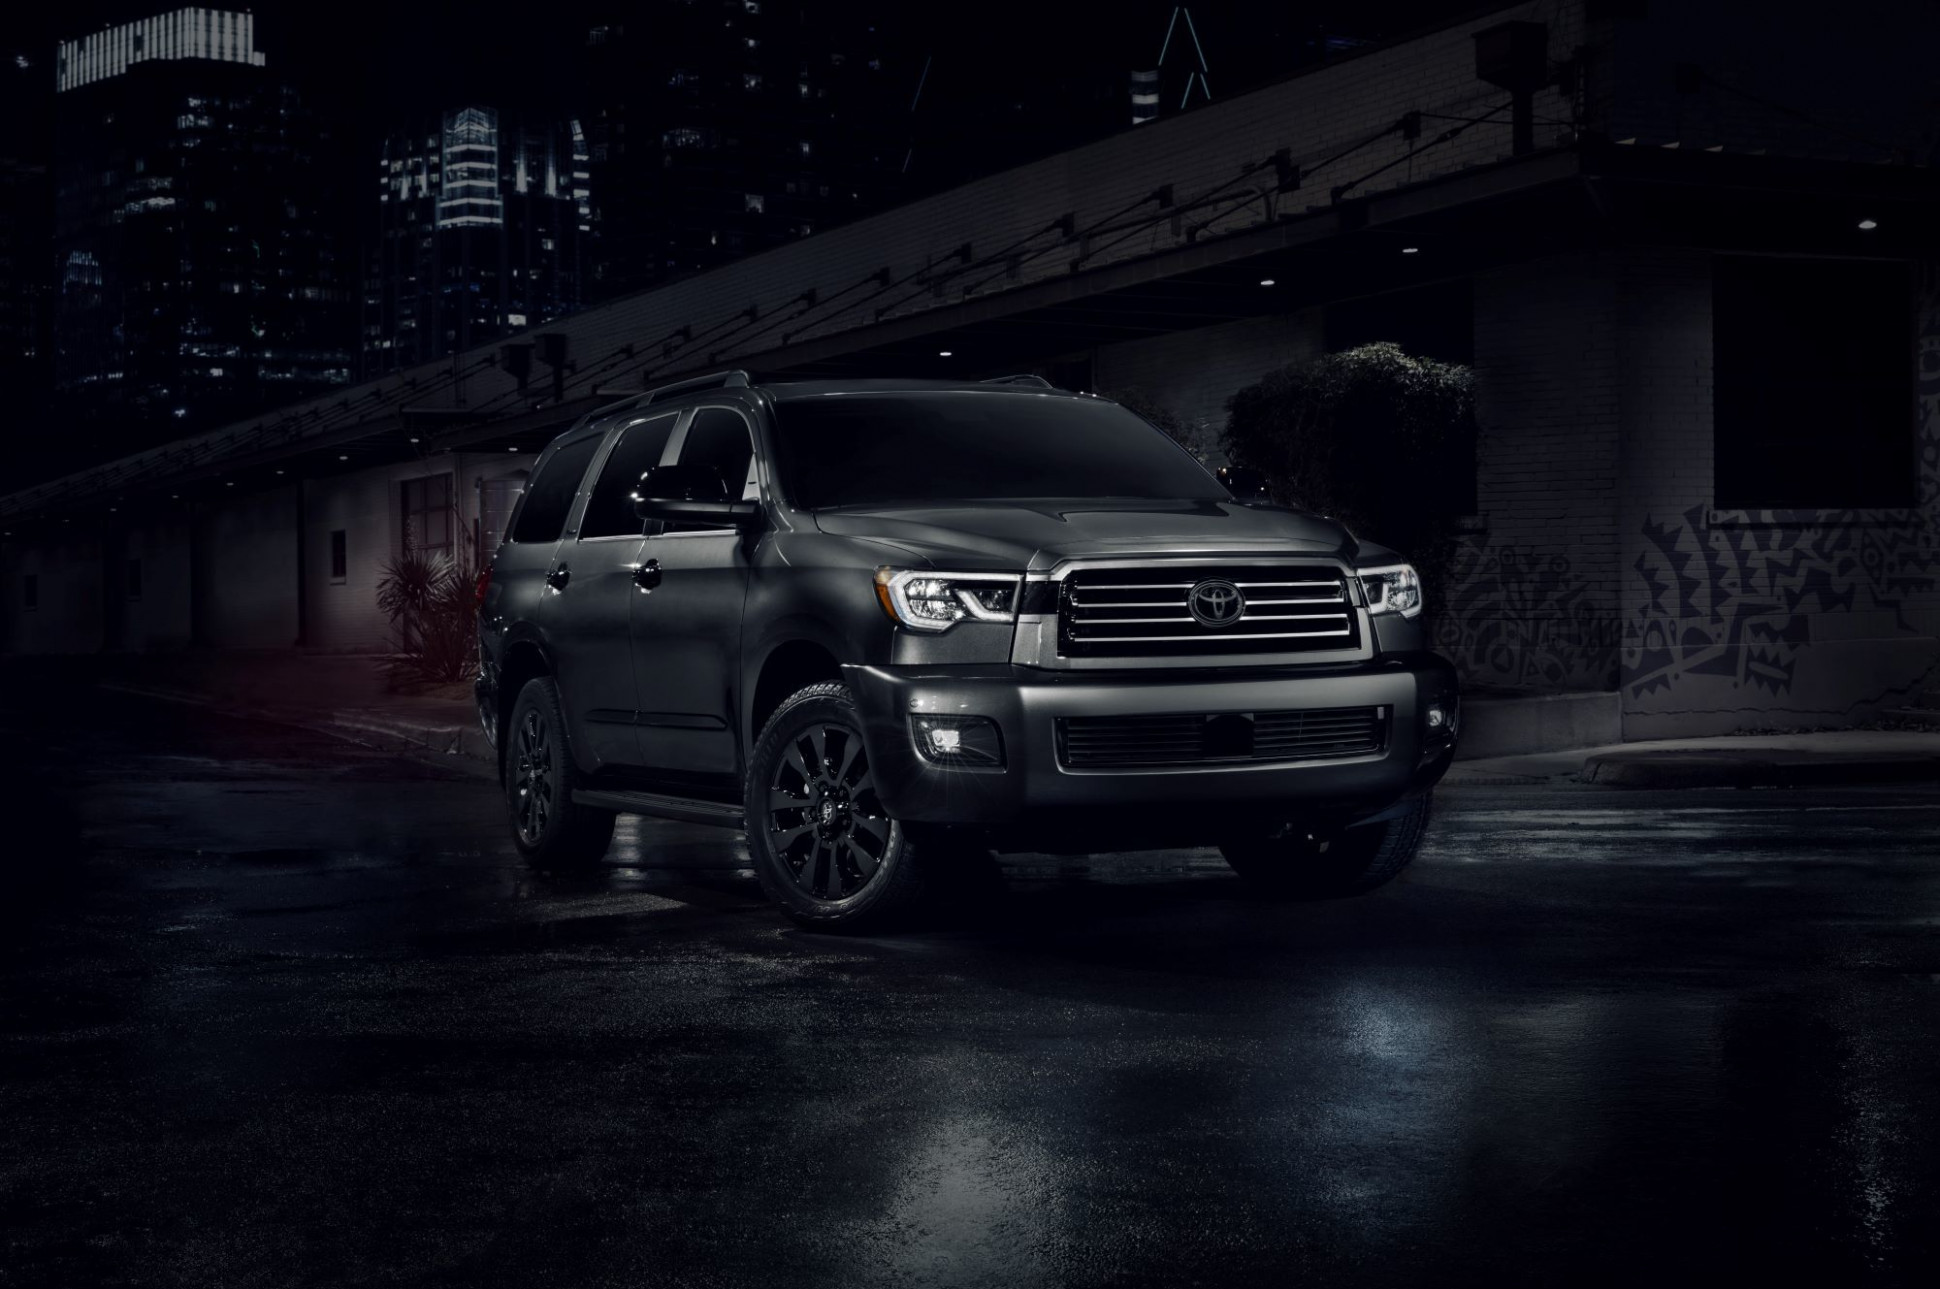 Performance and New Engine 2022 Toyota Sequoia